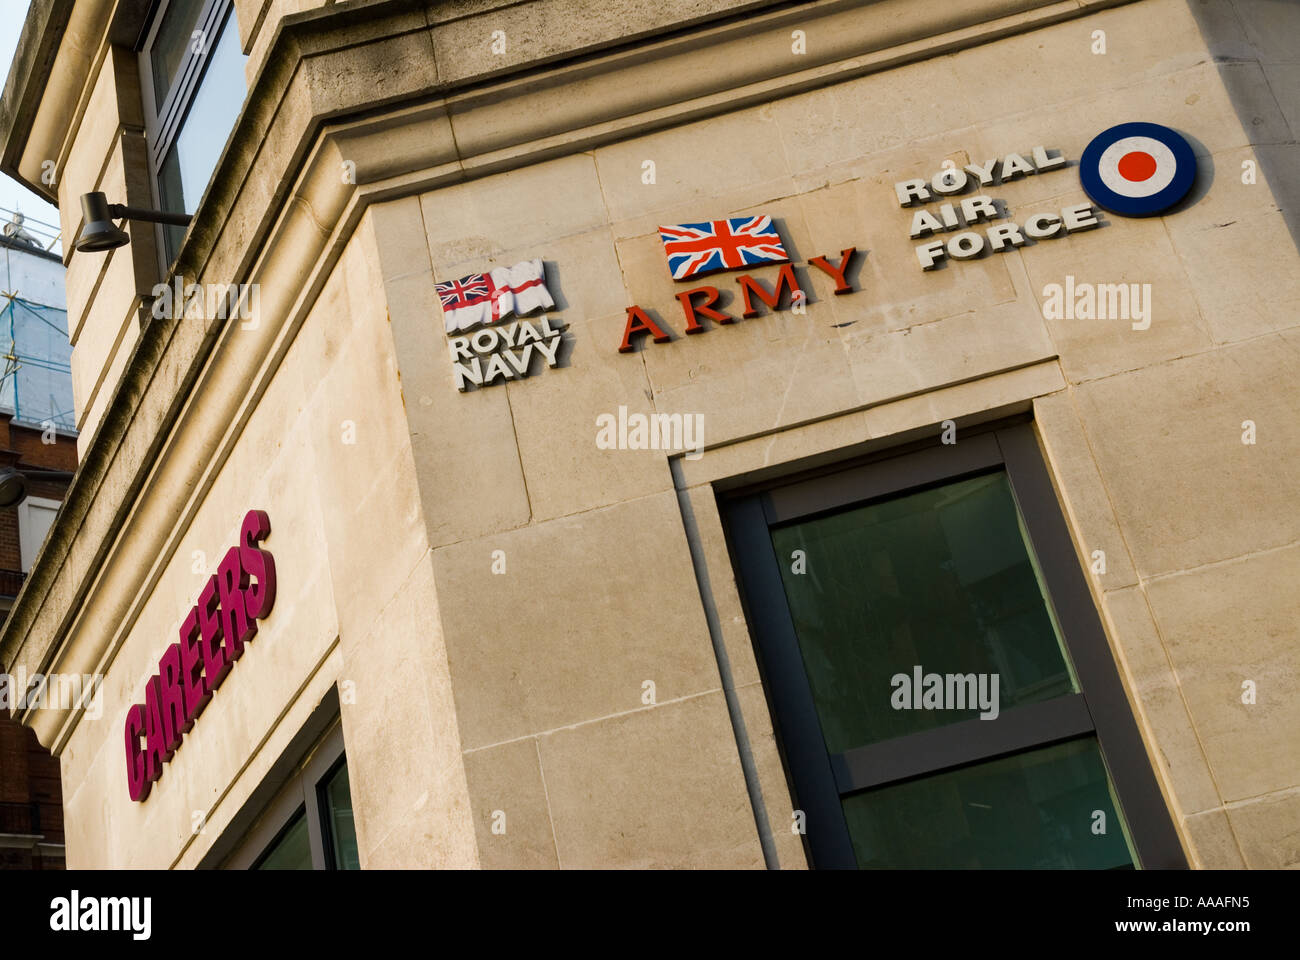 Careers in the Forces Royal Navy Army and Air Force building Central London office Stock Photo